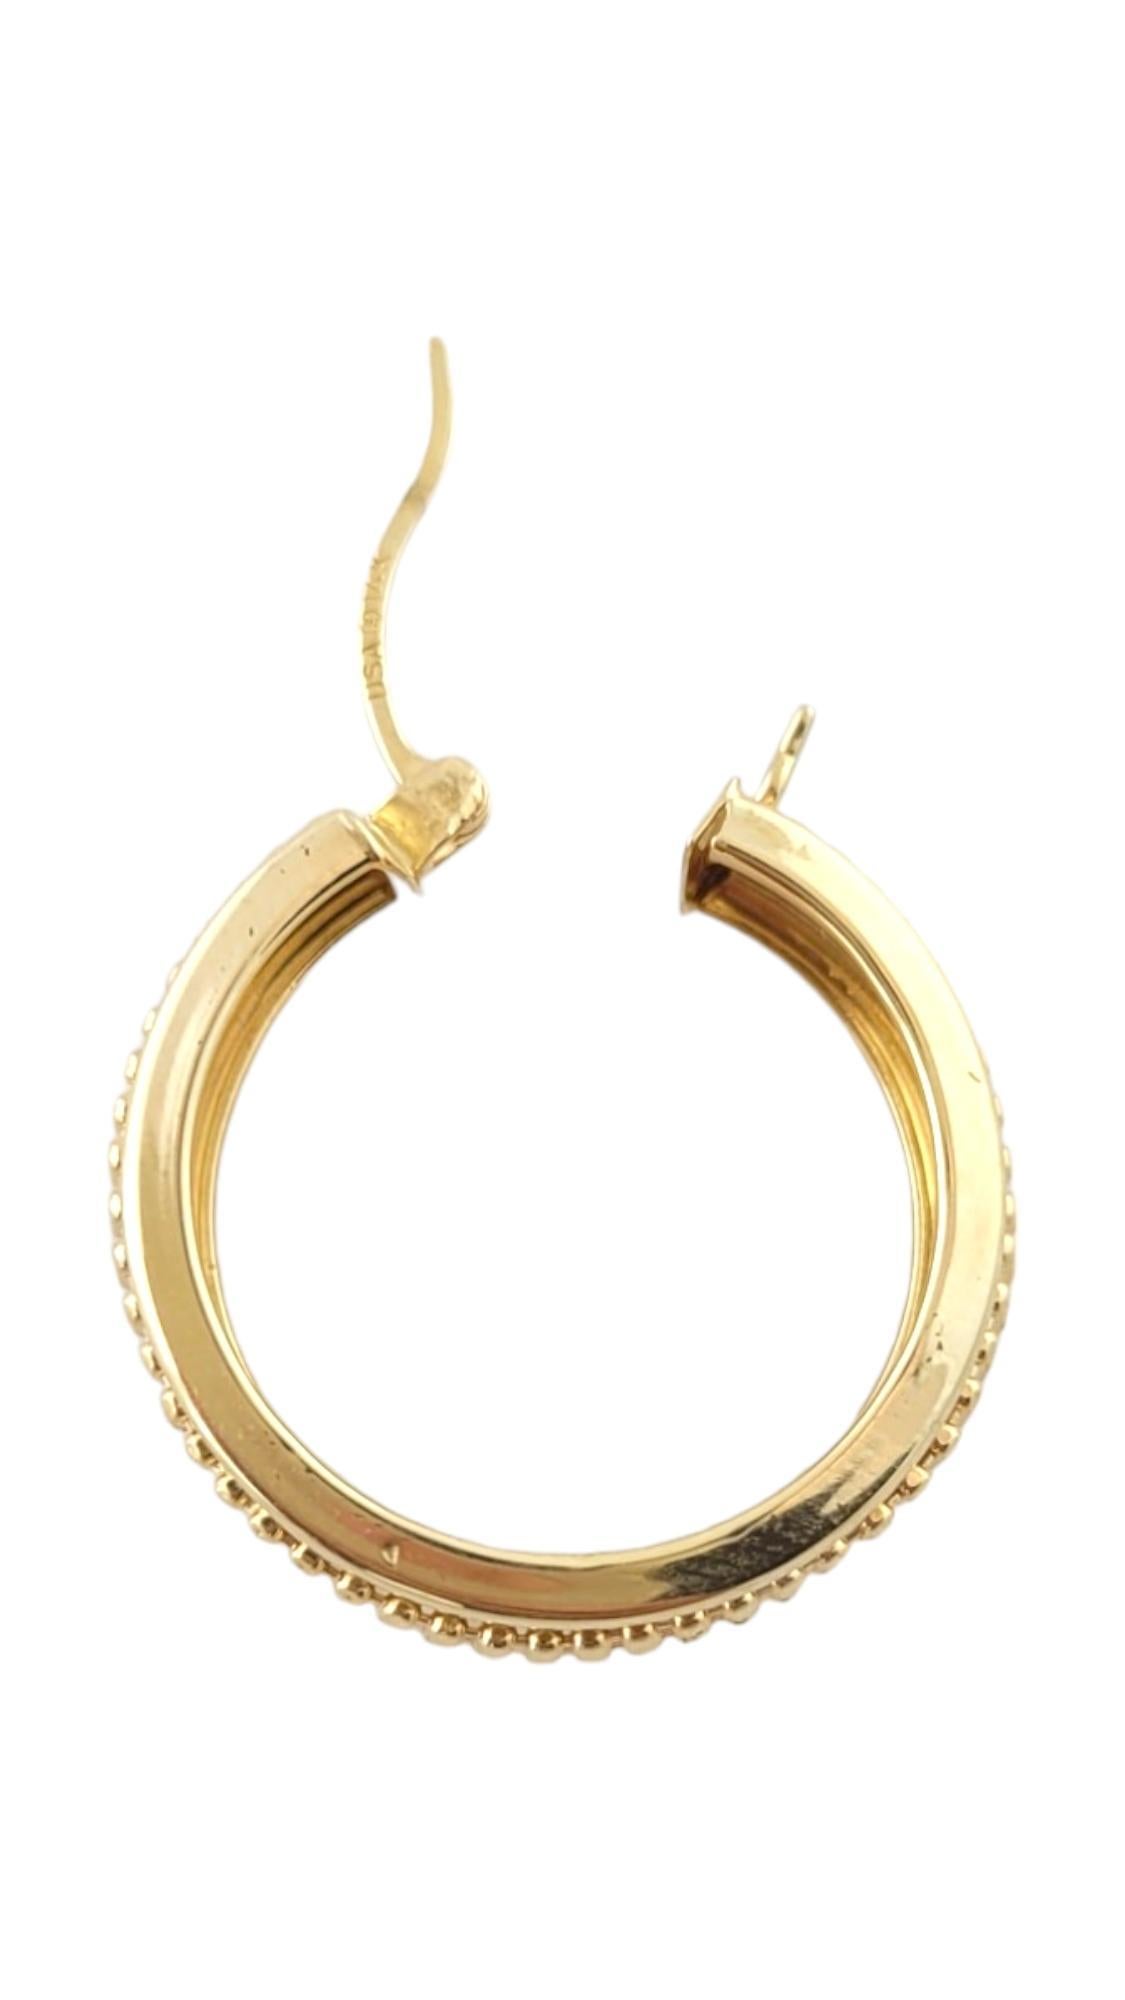 14K Yellow Gold Textured Wide Hoop Earrings #17377 In Good Condition For Sale In Washington Depot, CT